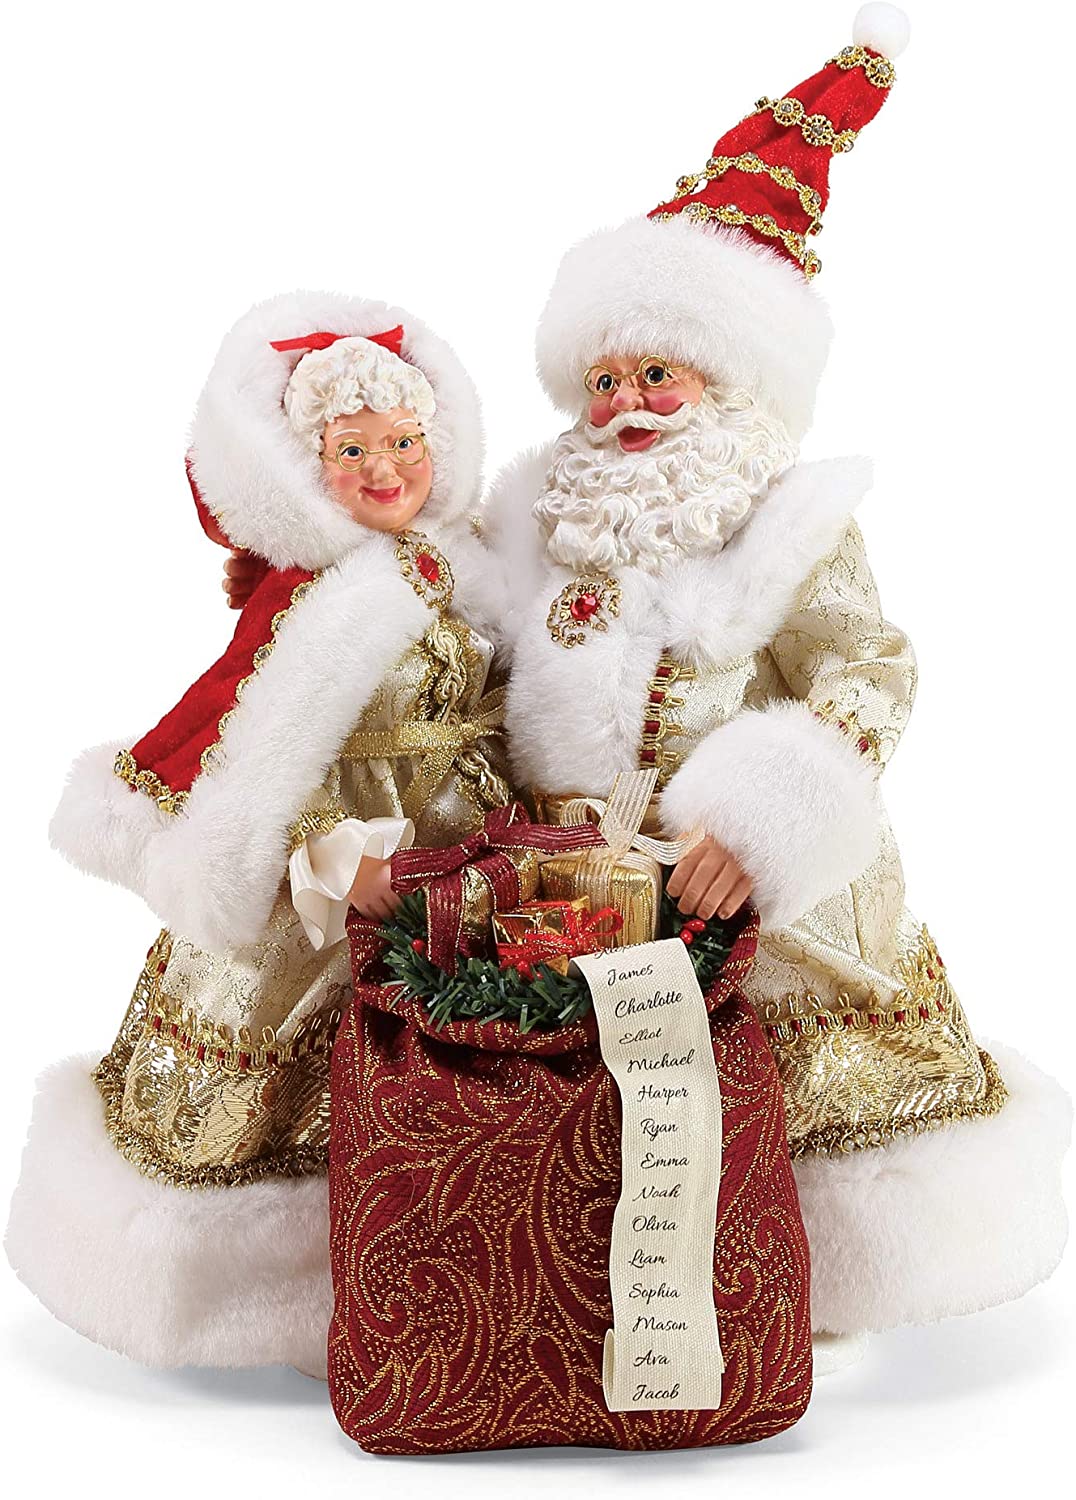 Unboxed Golden Years Mr and Mrs Santa Possible Dreams Santa